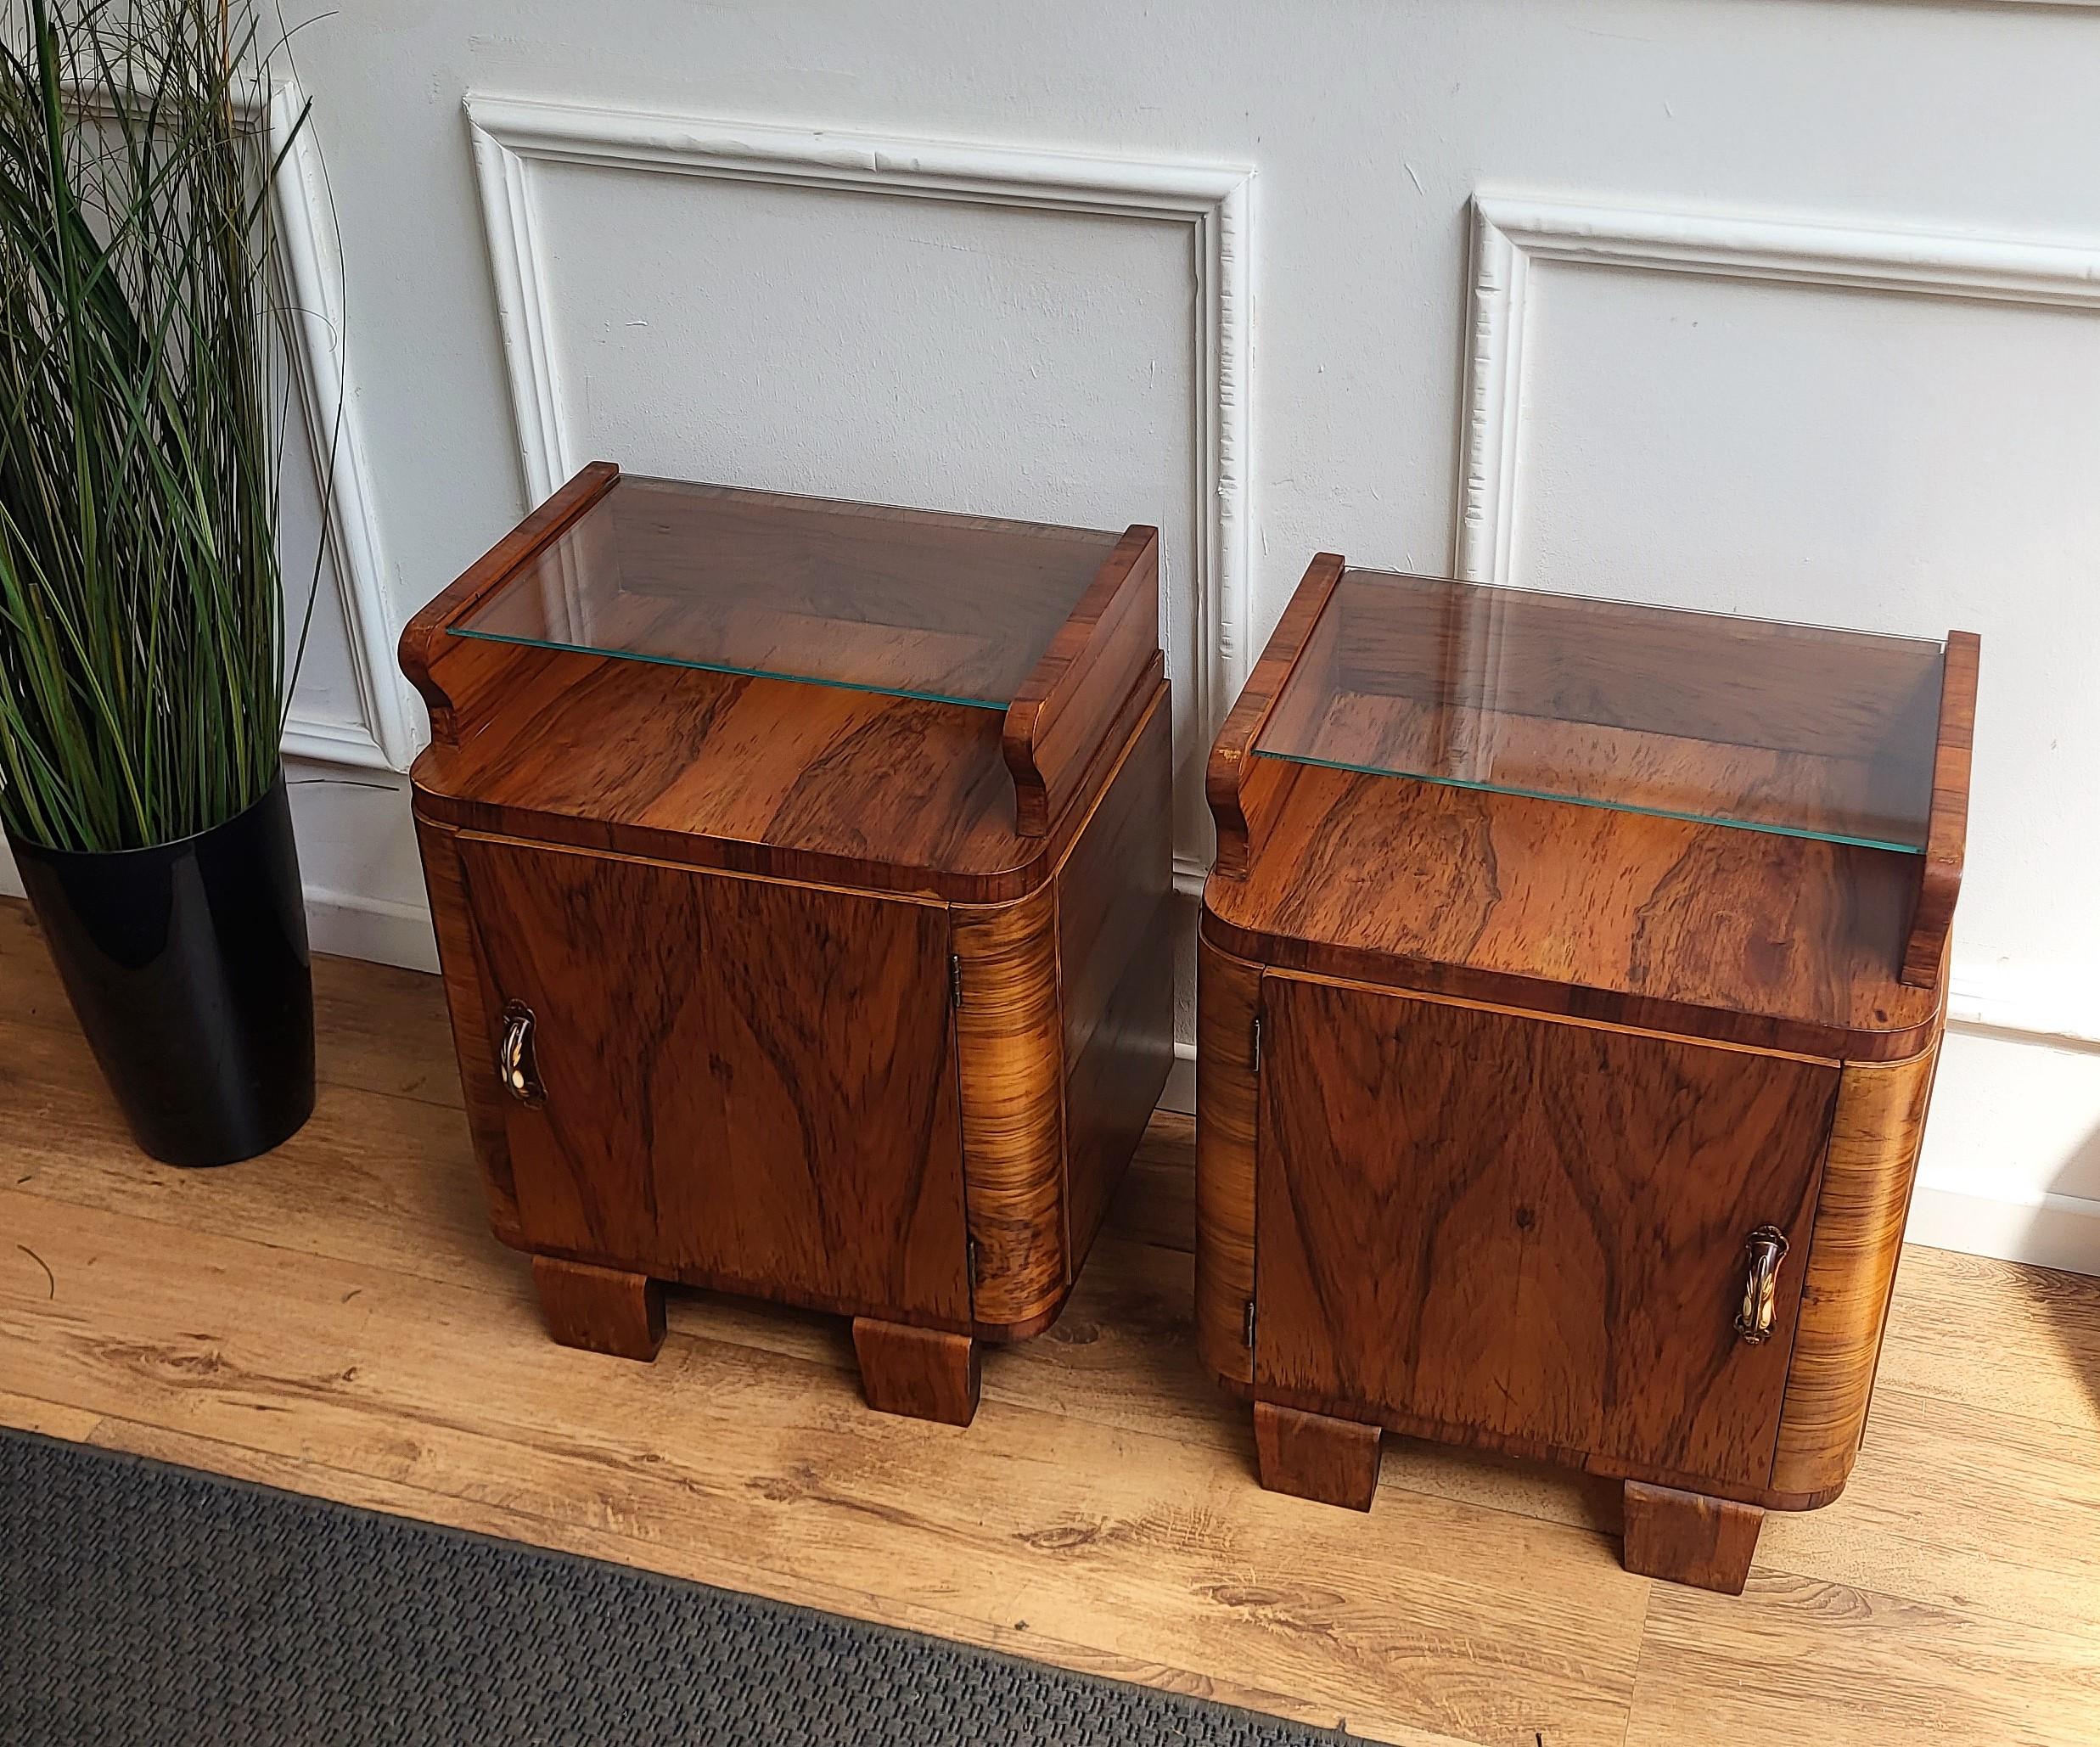 Very elegant and refined pair of Italian 1940s Art Deco bedside tables with great design shape and decors in veneer burl walnut briar wood, front door and top glass shelf. This night stands make a great look in any style bedroom, as a complementary